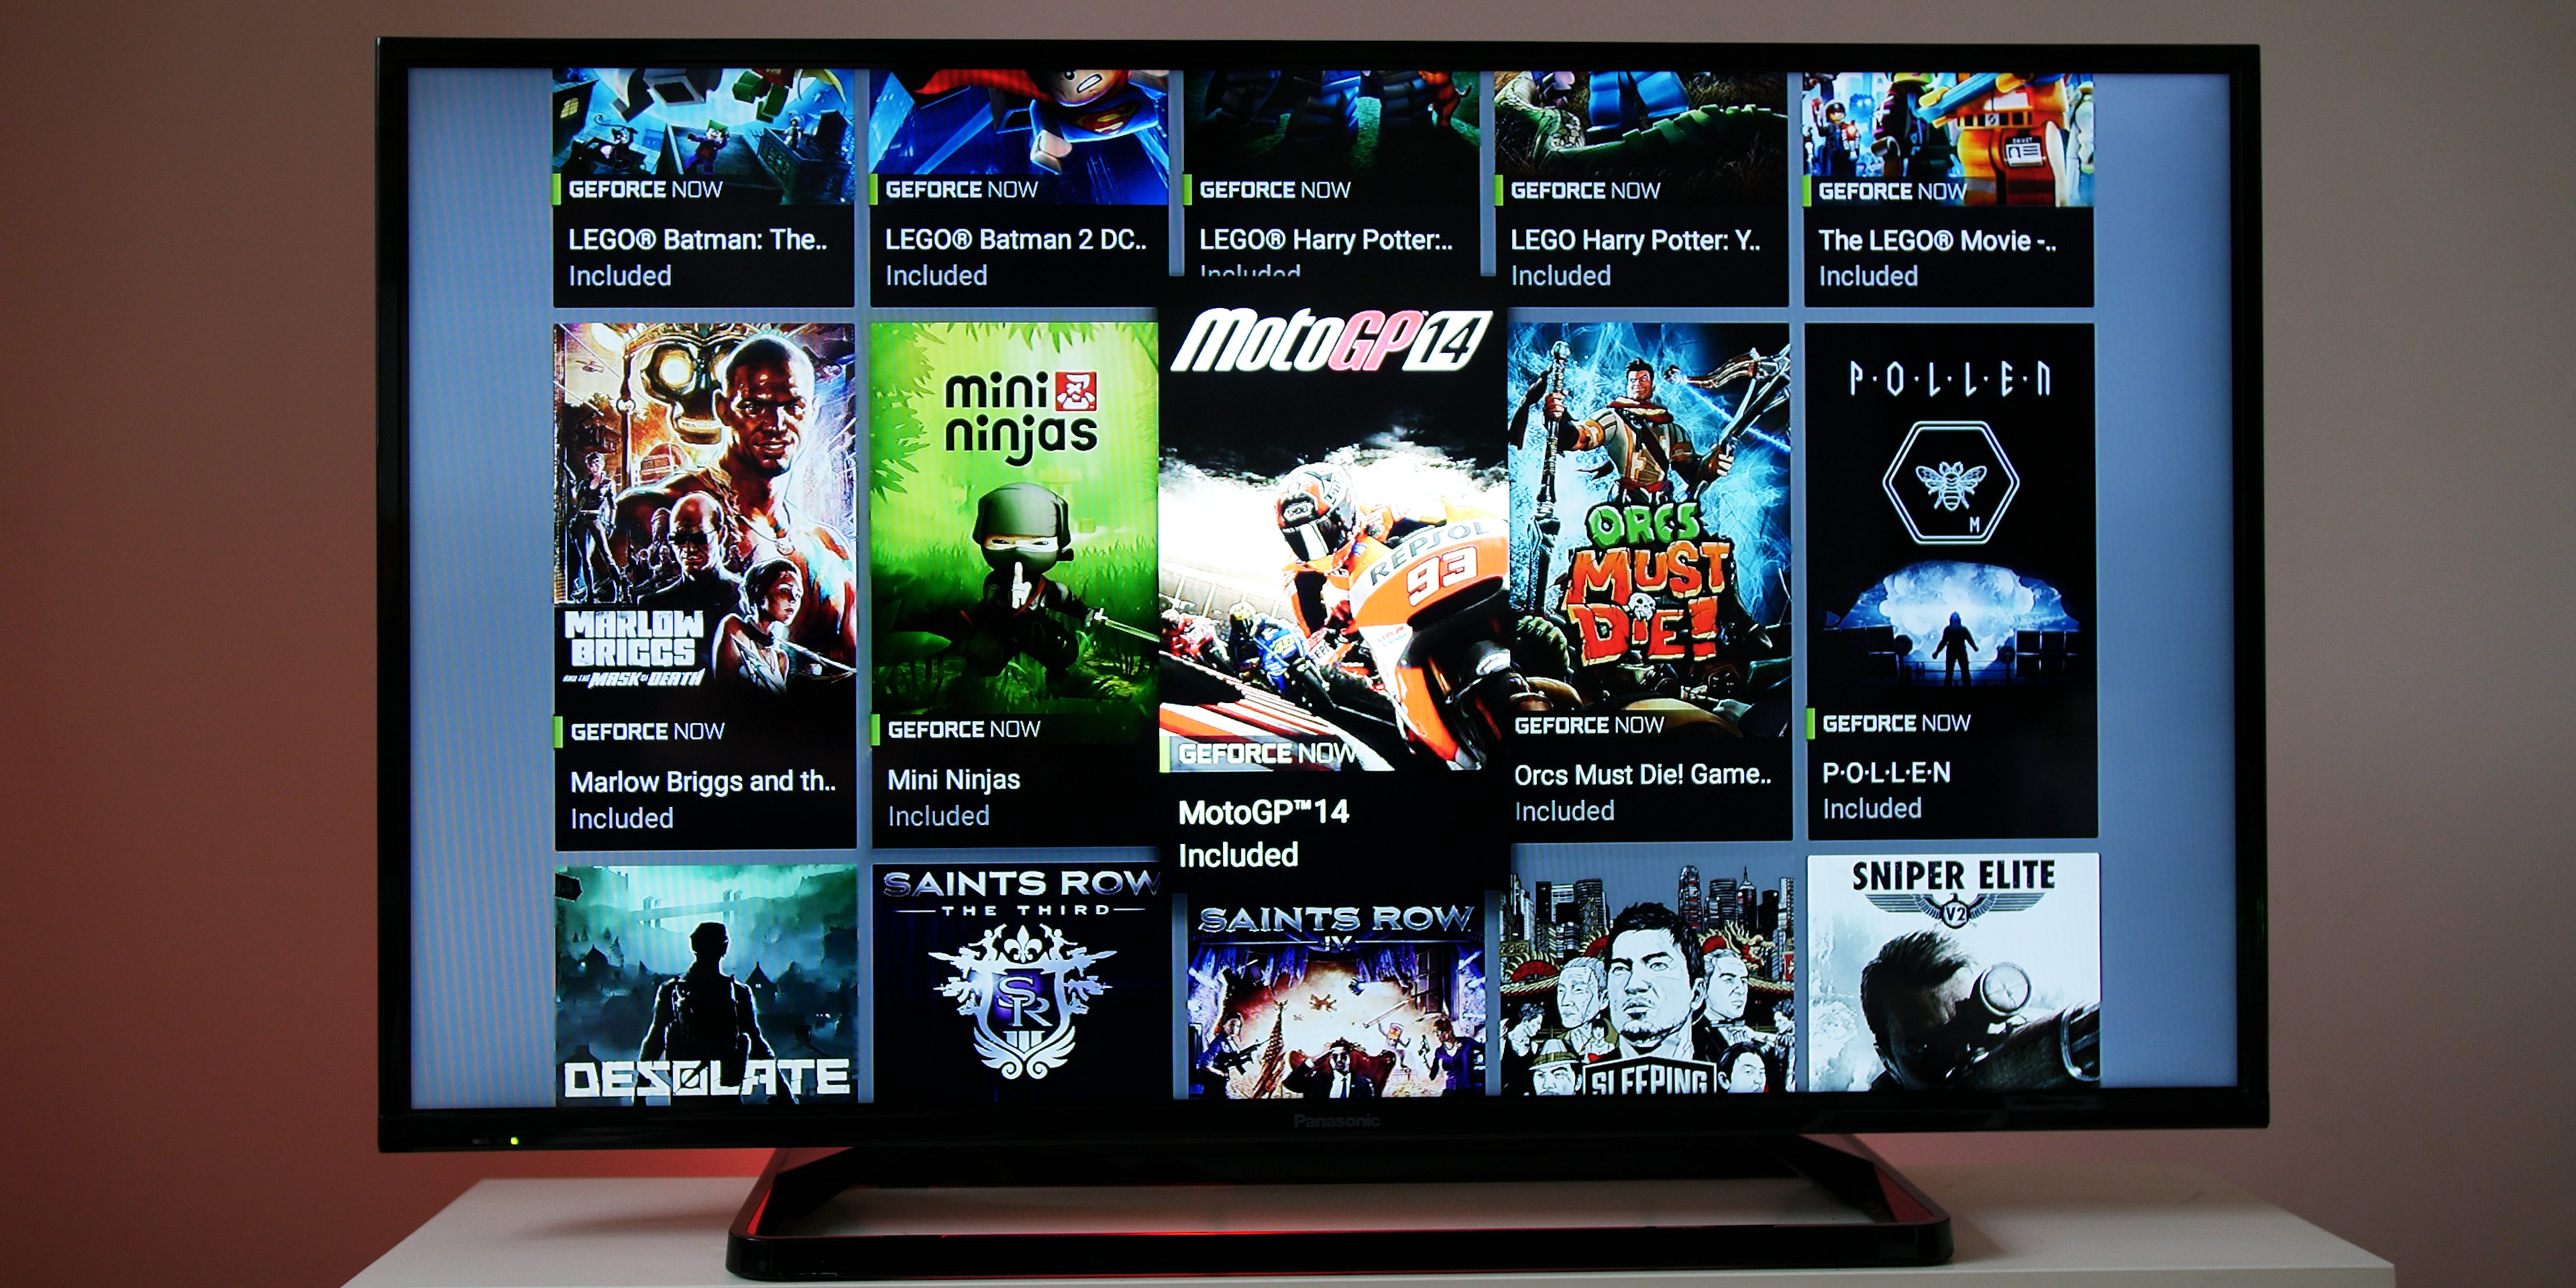 NVIDIA GeForce NOW for SHIELD TV